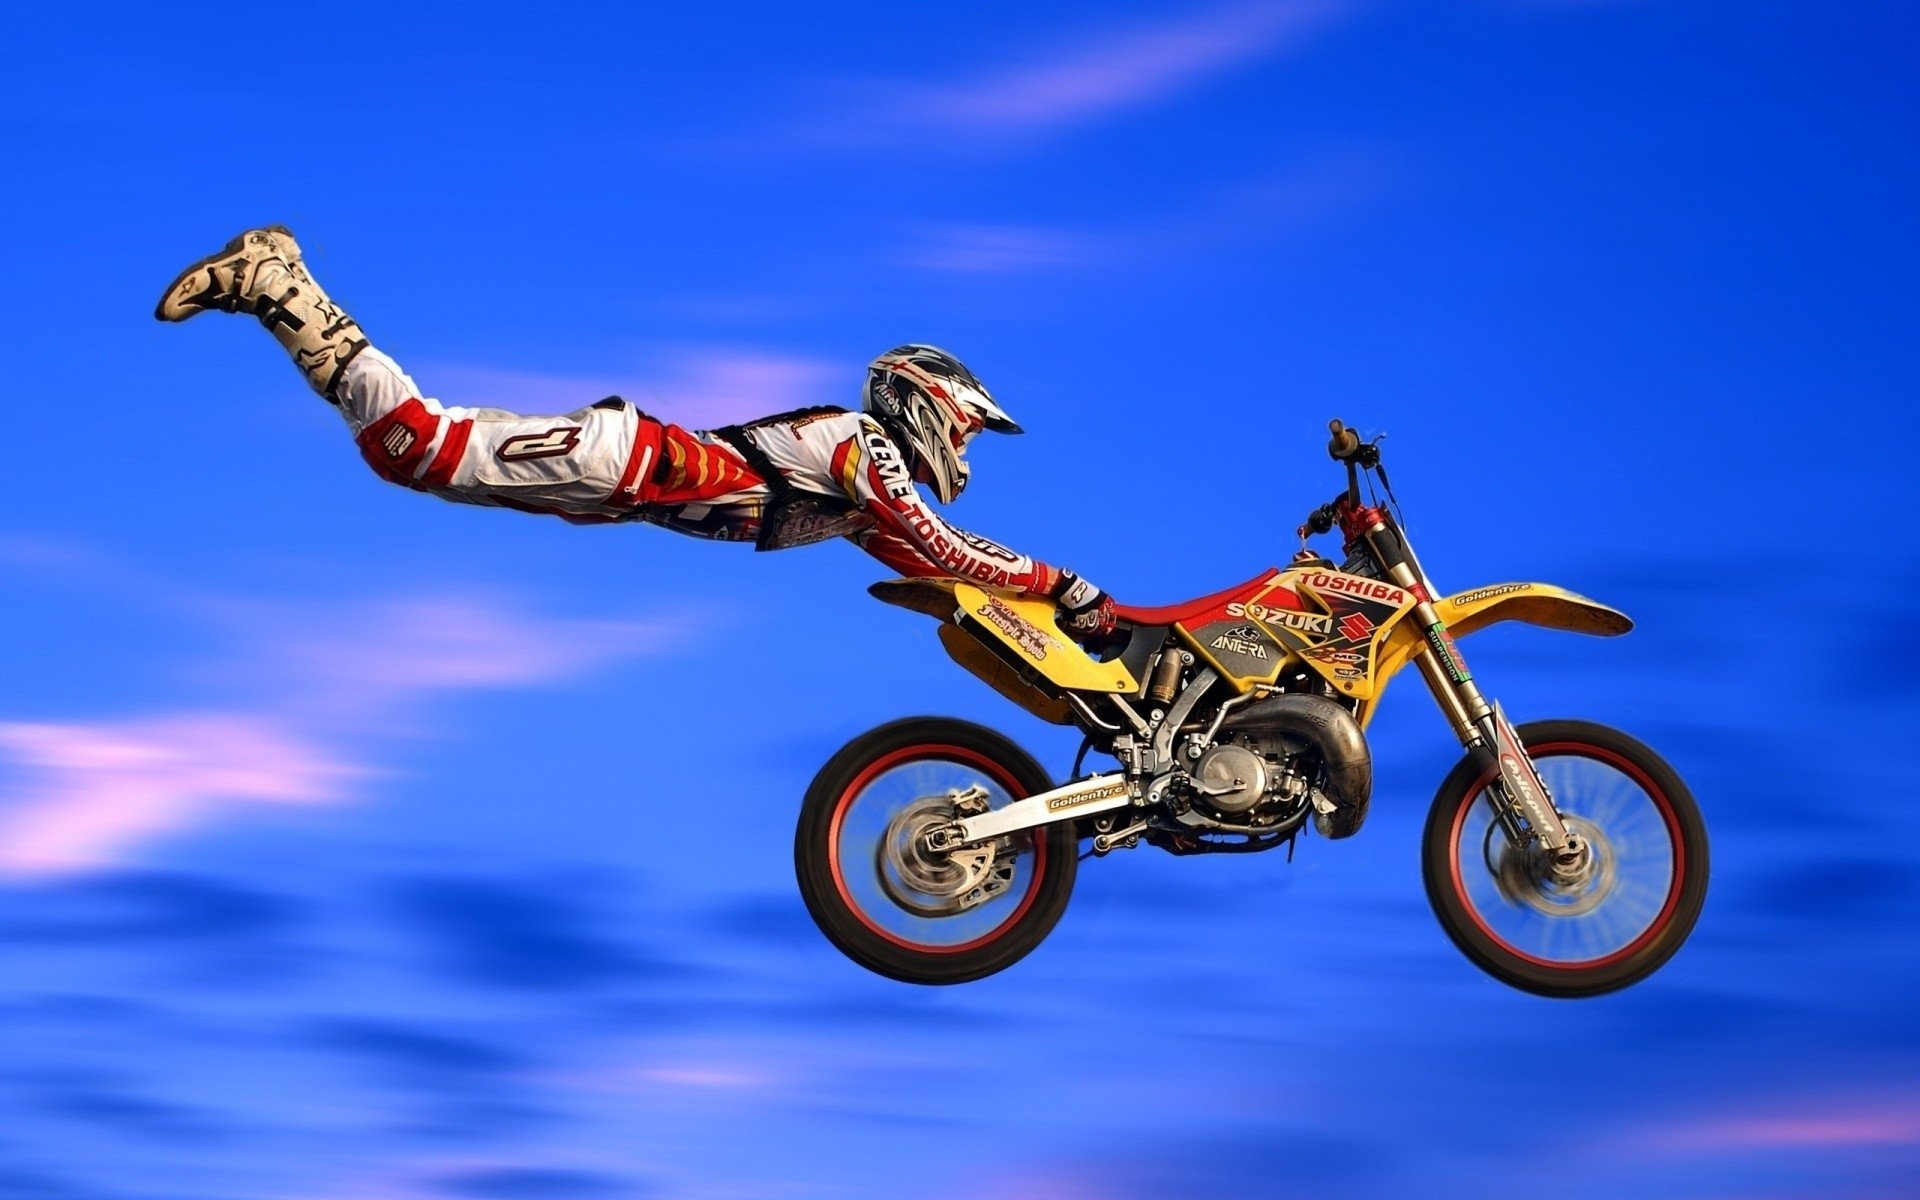 Jumping: Motocross, Off-road motorcycle racing, Dirt Bike, Extreme sports. 1920x1200 HD Background.